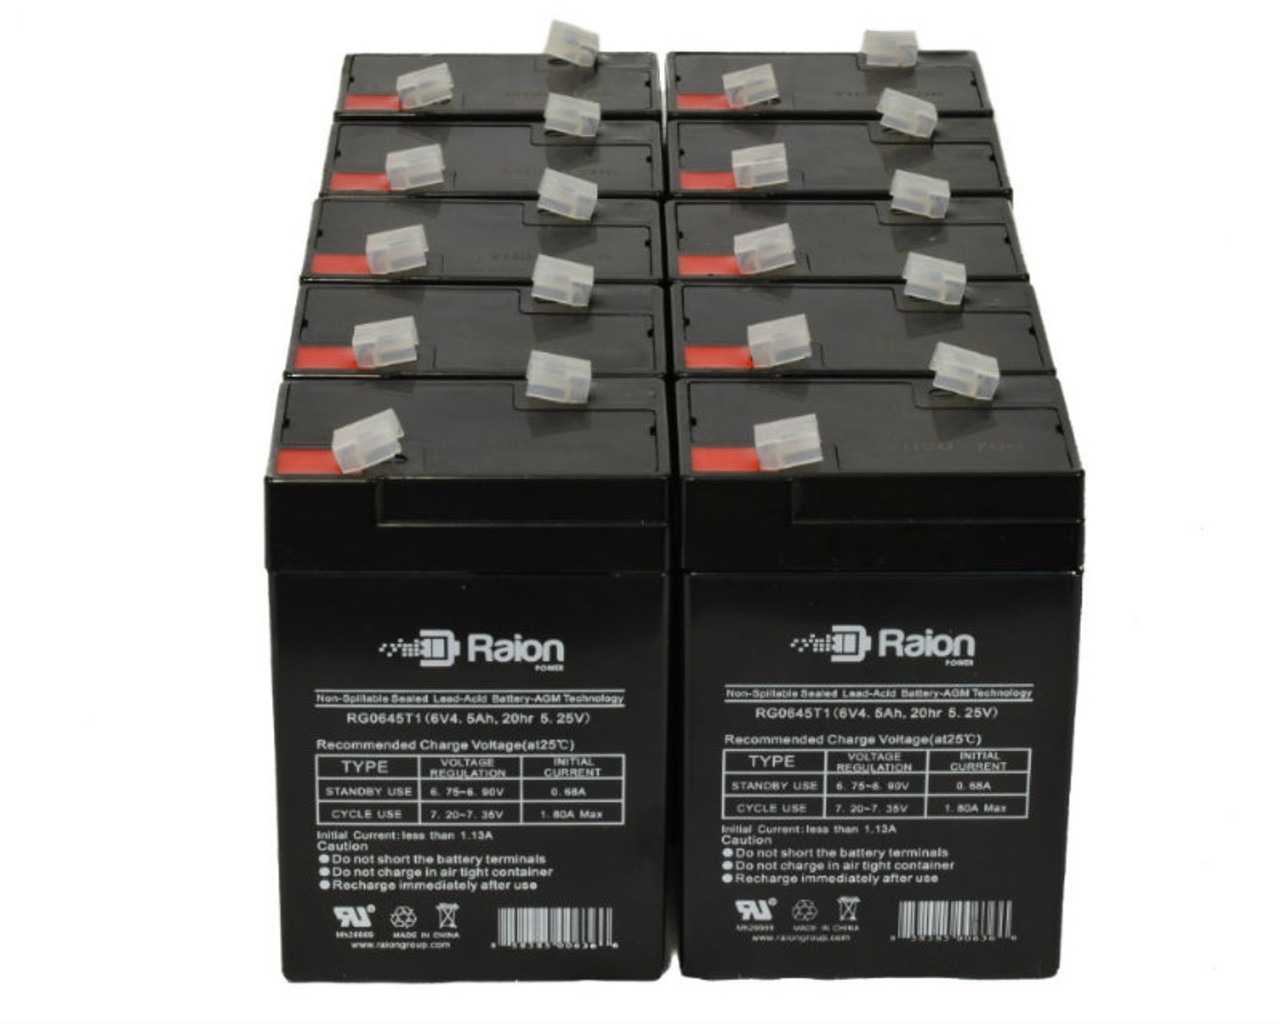 Raion Power 6 Volt 4.5Ah RG0645T1 Replacement Battery for Double Tech DB6-4 - 10 Pack